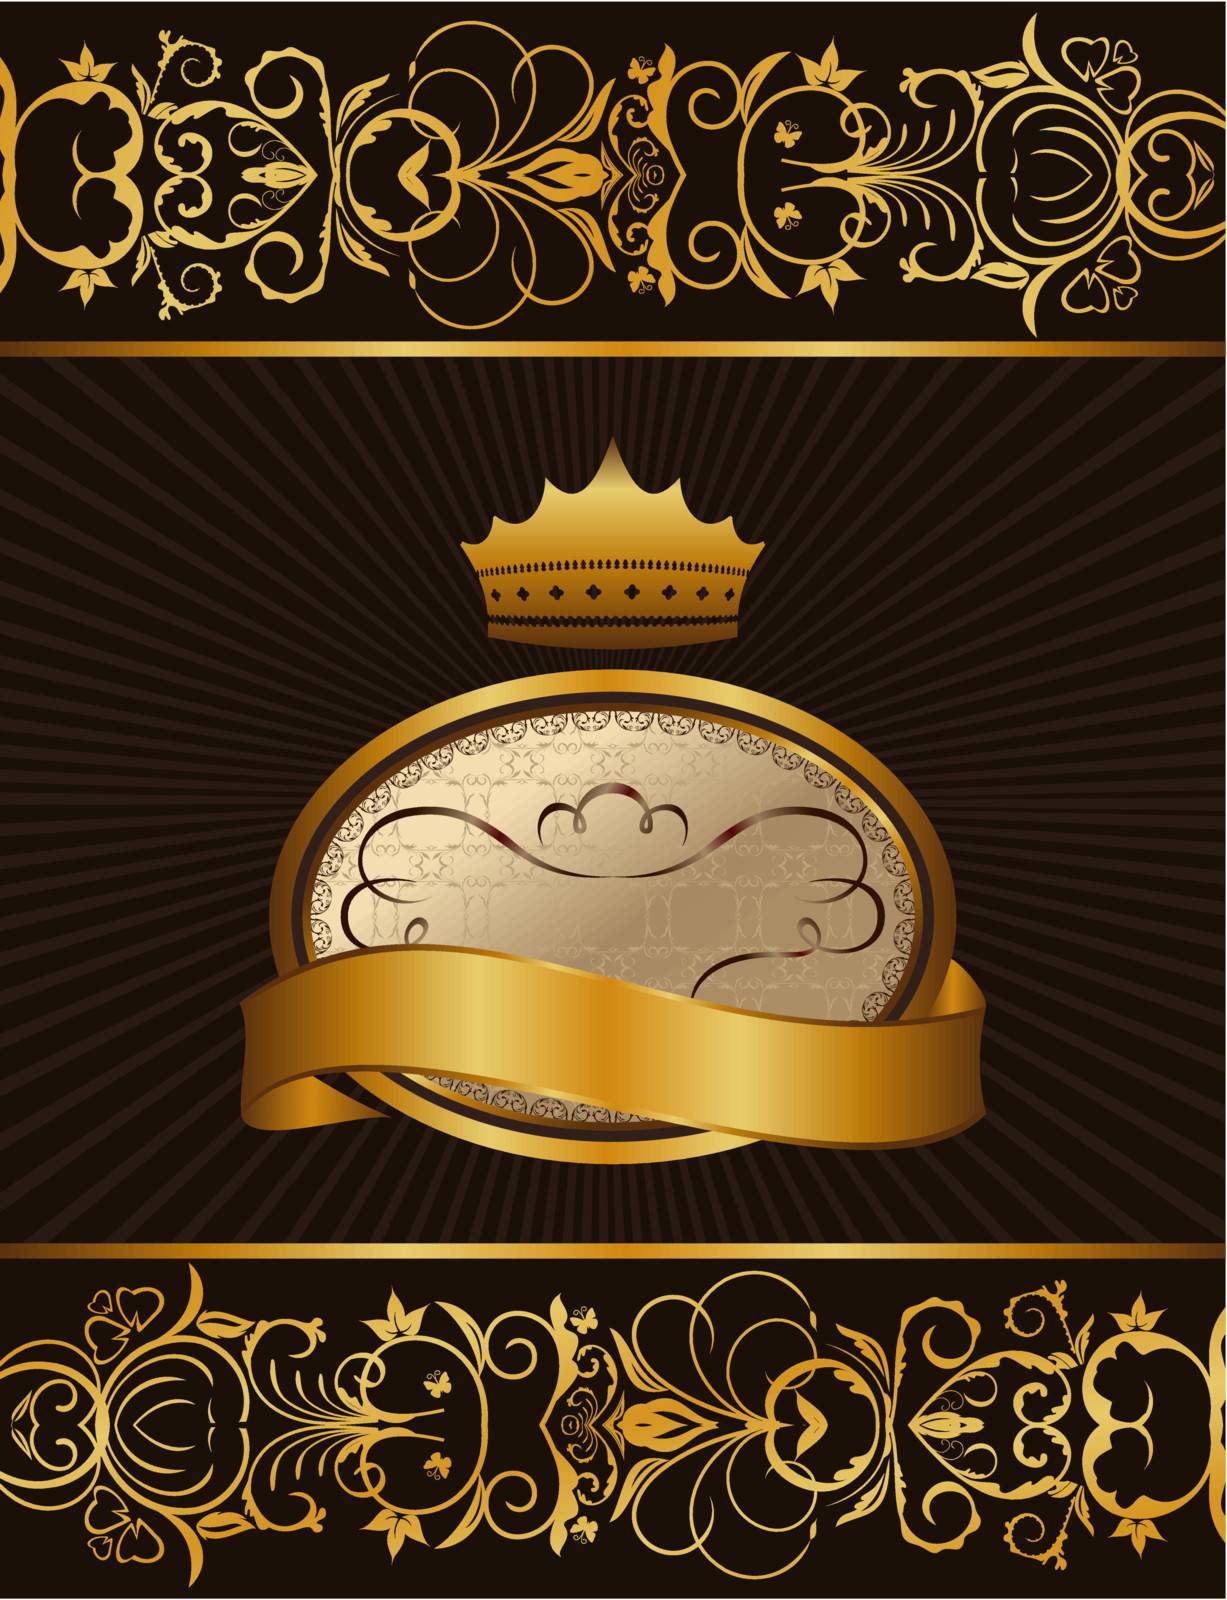 Illustration luxury background with crown - vector